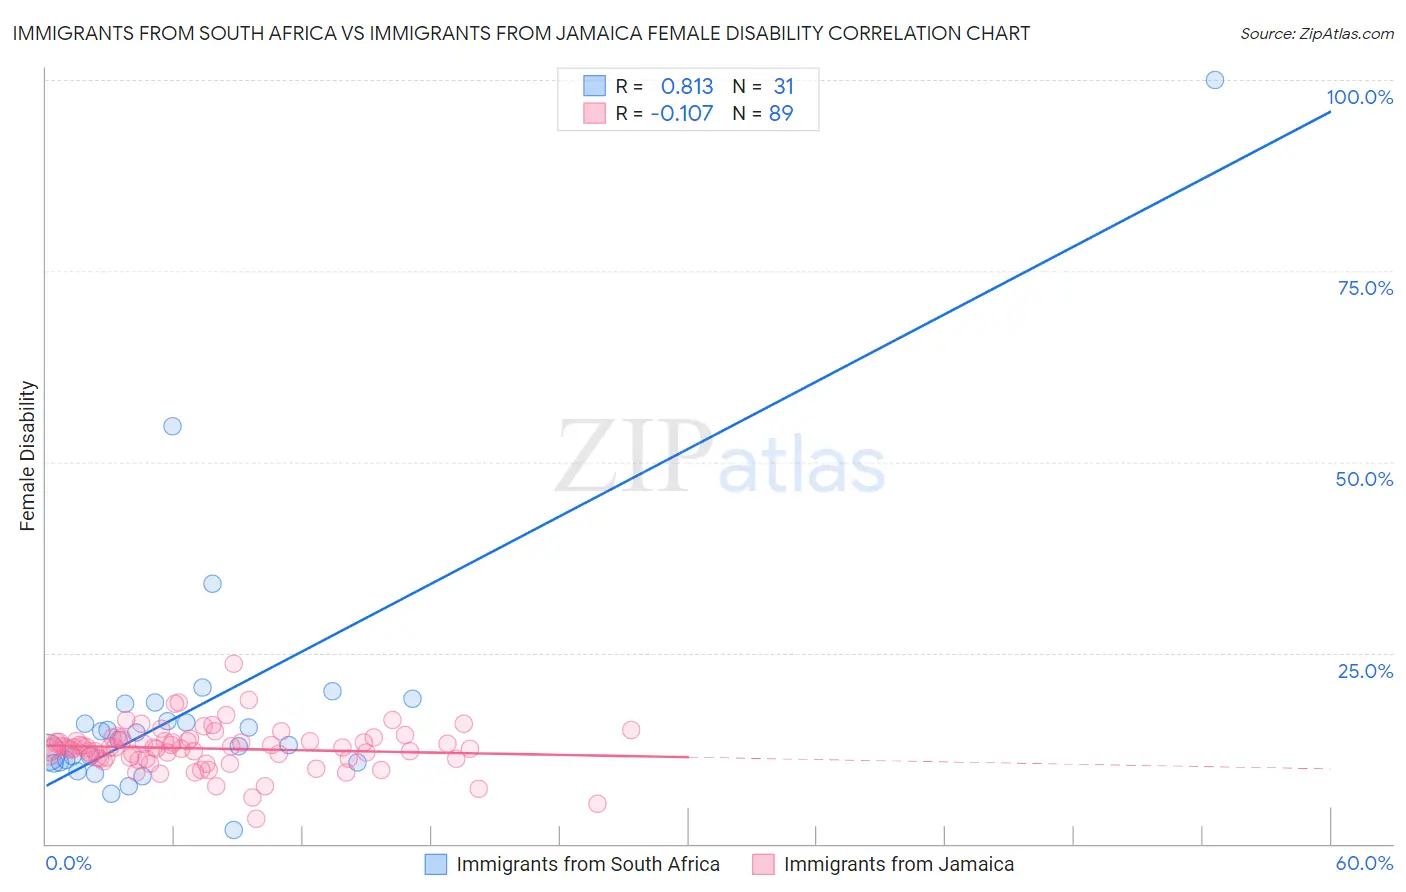 Immigrants from South Africa vs Immigrants from Jamaica Female Disability